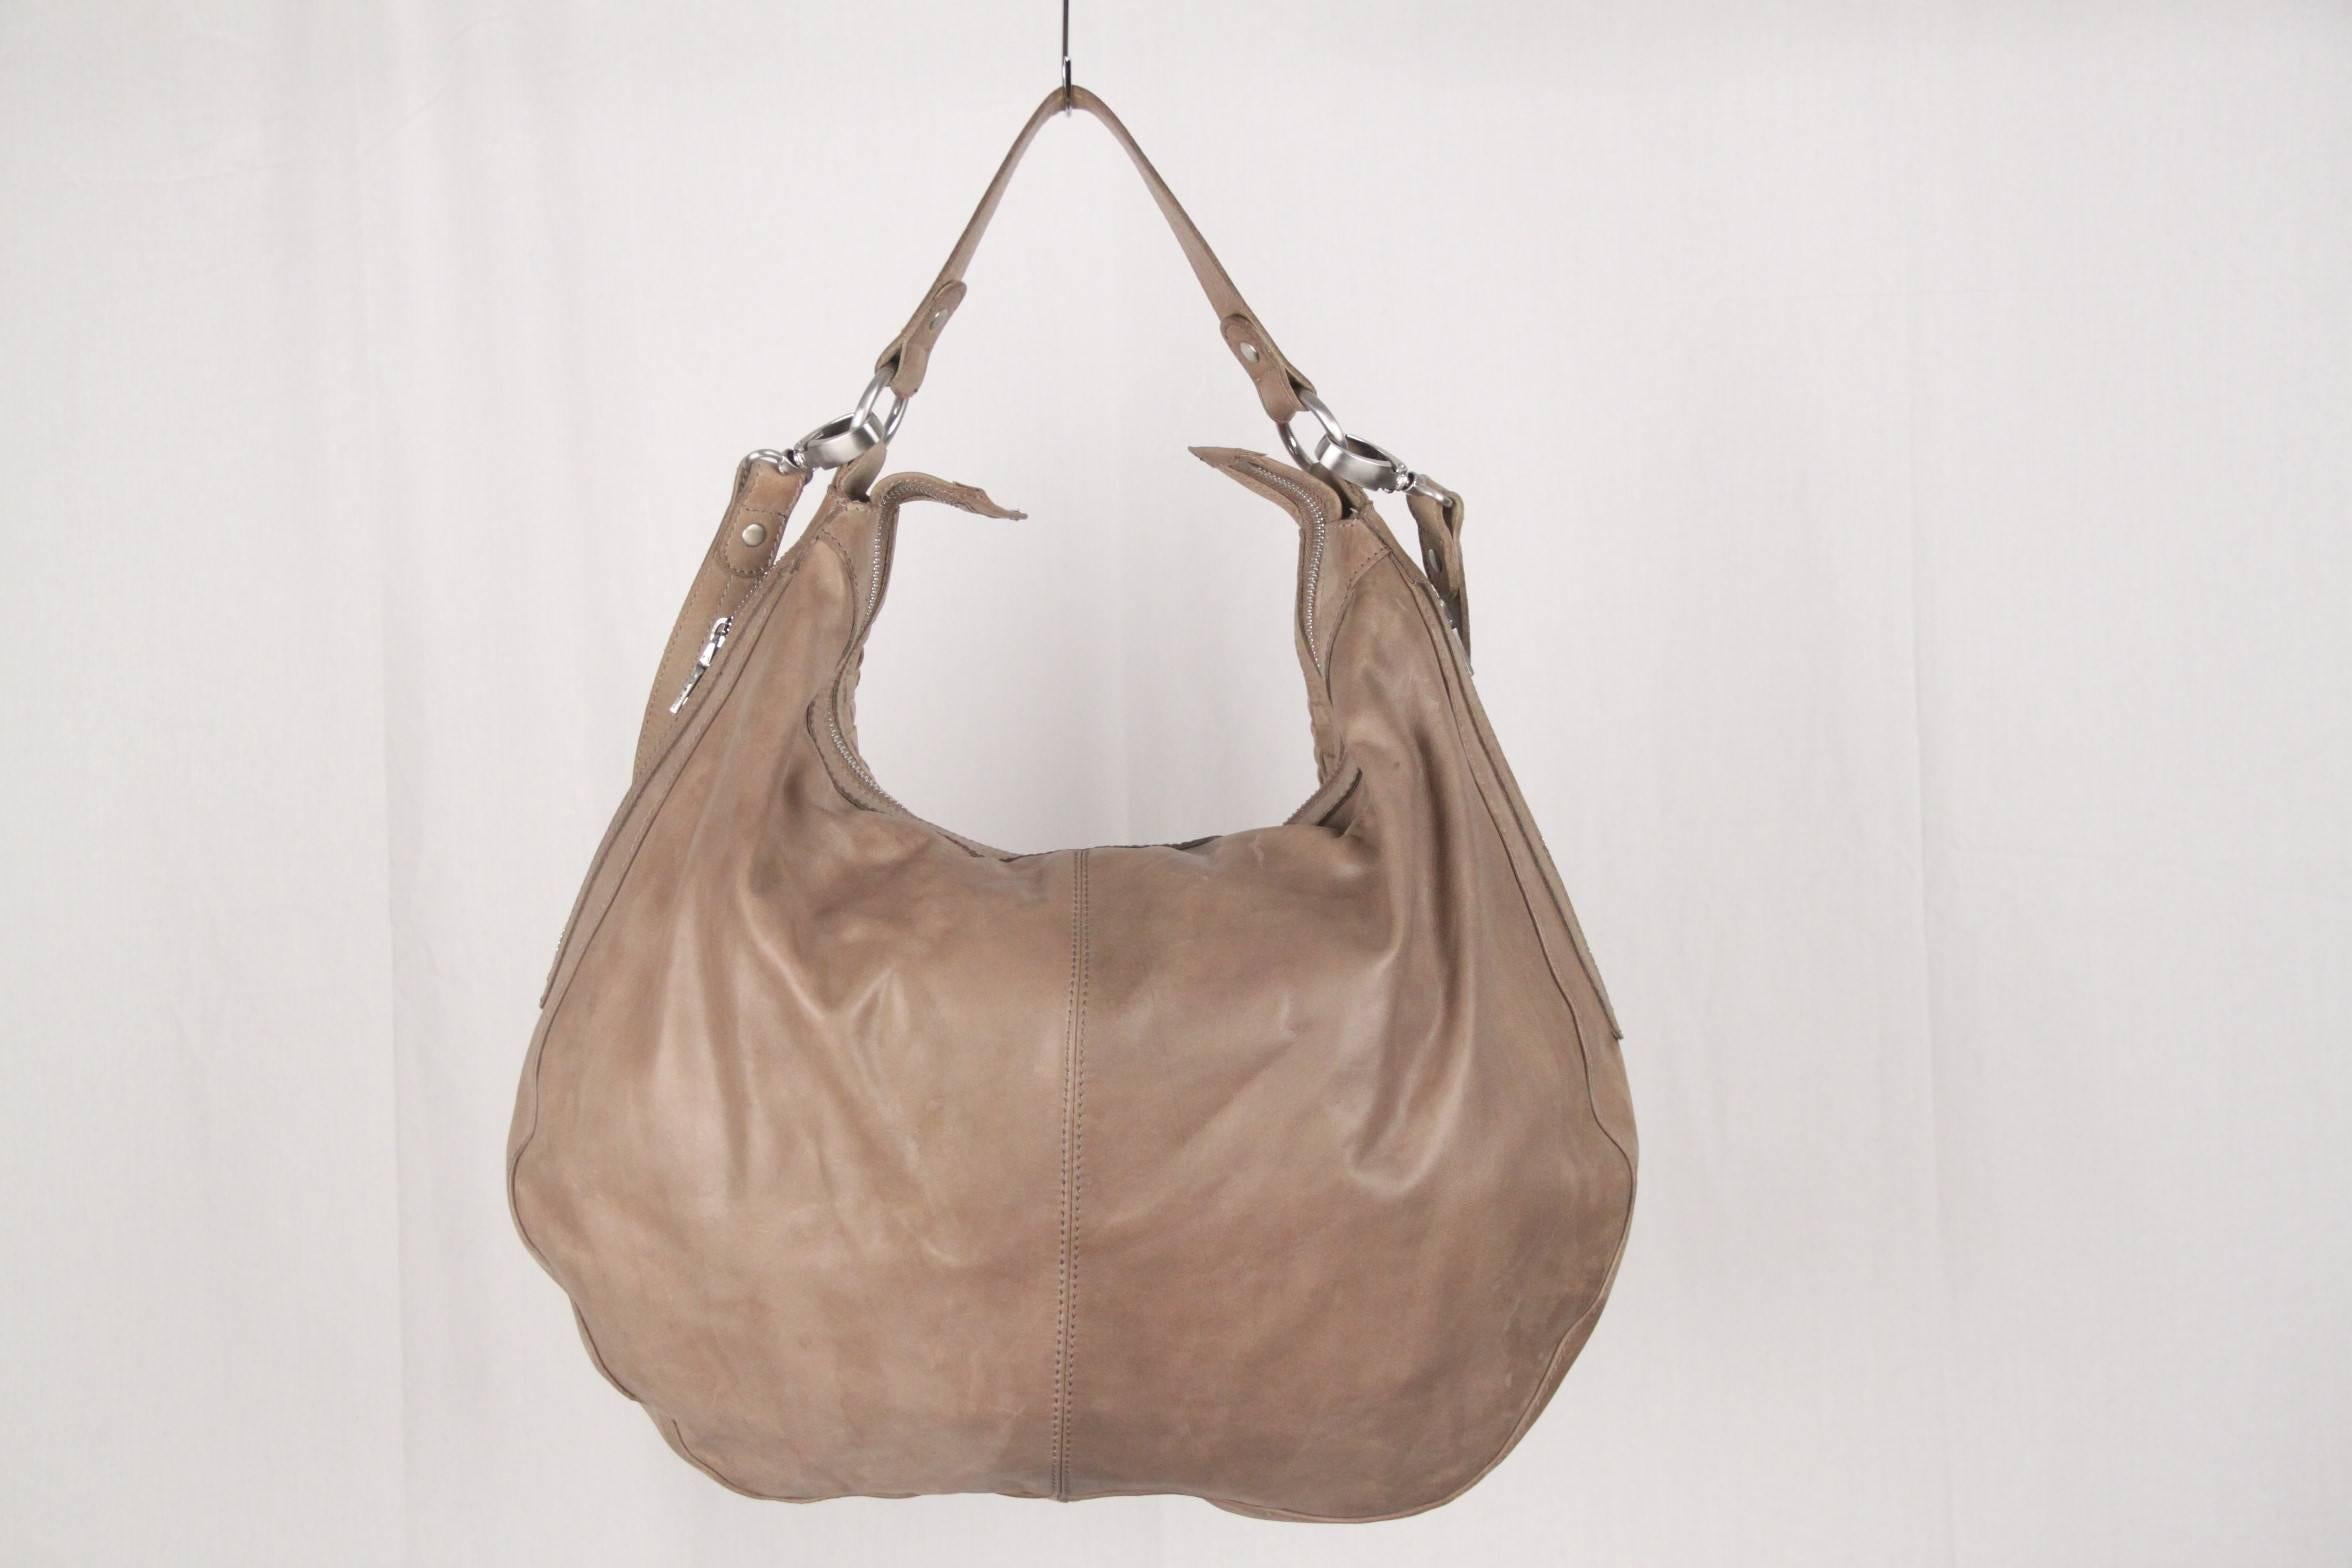 - Model: 'Mandy' Large Hobo
- Taupe woven leather
- Silver metal hardware
- Zip pockets on the sides
- Zippered closure
- Fully lined with tan fabric
- 2 side zip pockets and 3 open pockets inside
- Removable shoulder strap (28 inches - 71 cm